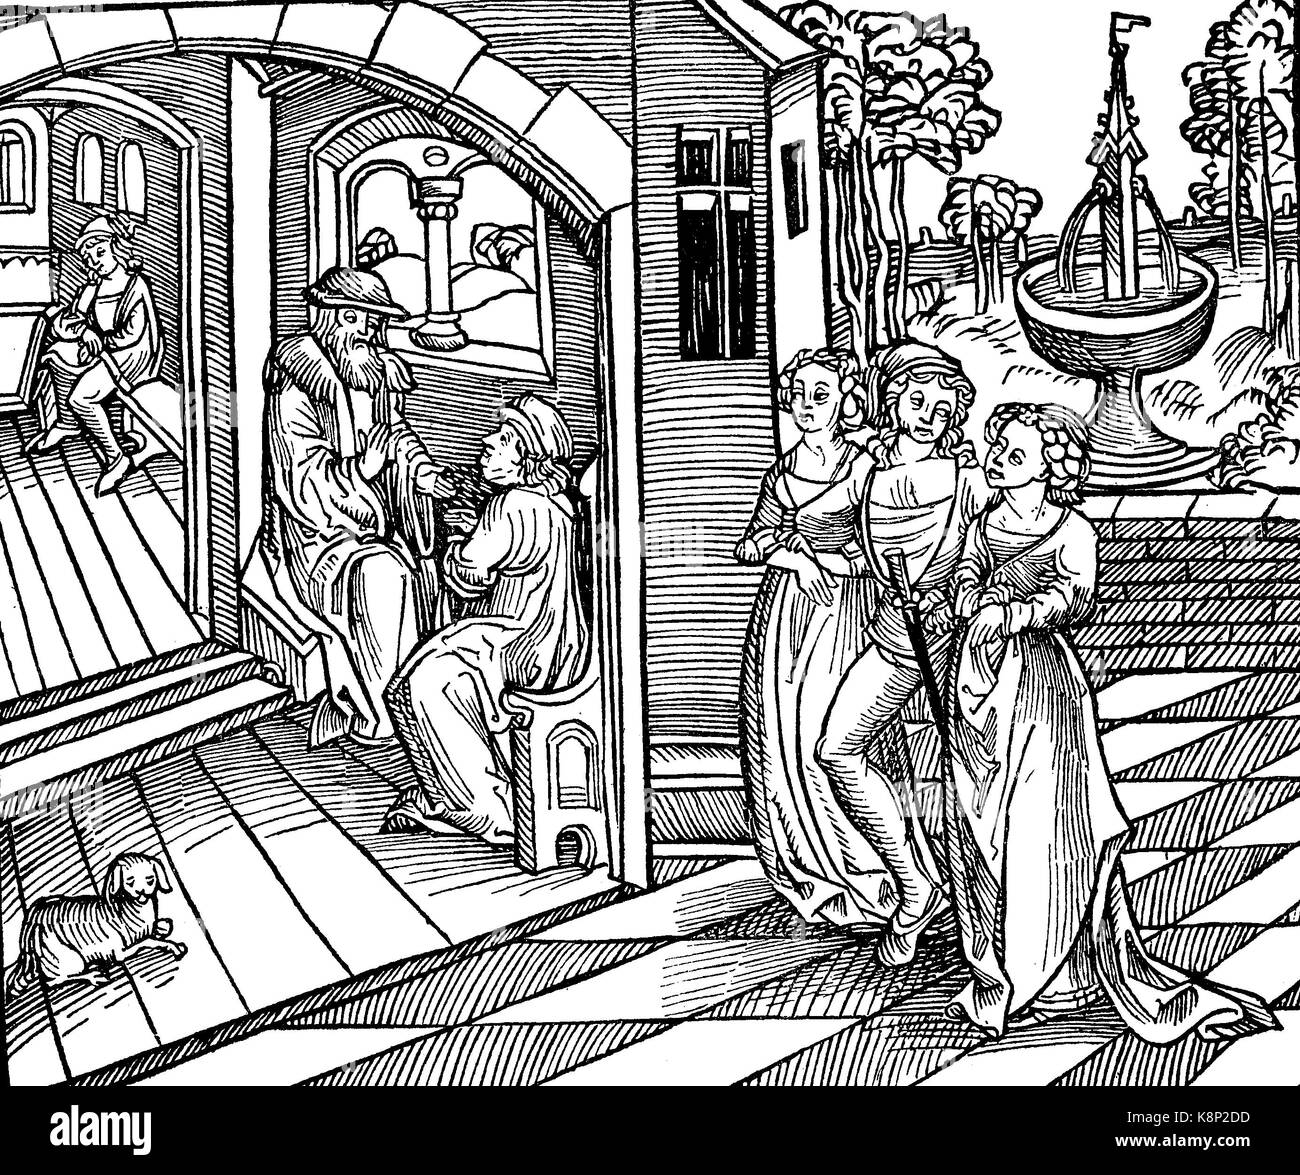 Young man in love with two girls, left side scholars talking, Verliebter Jüngling mit zwei Mädchen, Links Gelehrte im Gespräch, ca 1500, digital improved reproduction of a woodcut, published in the 19th century Stock Photo